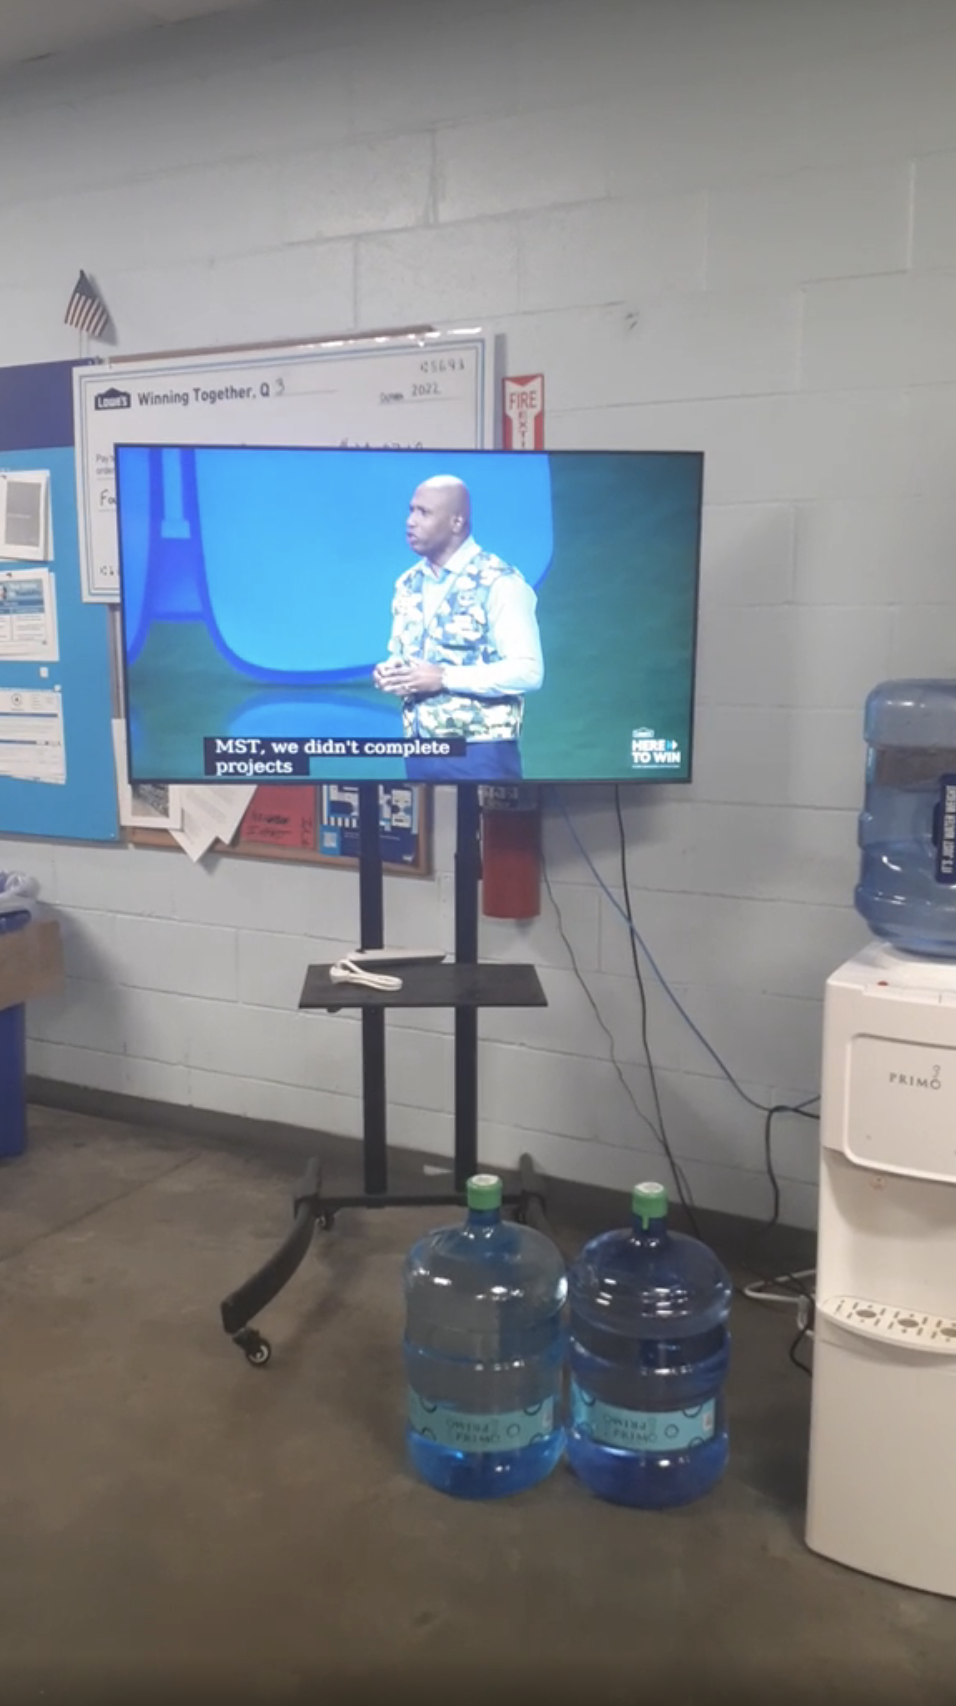 A person is speaking on a TV screen in a room with water coolers and office equipment. The screen displays subtitles but the person&#x27;s name is not visible